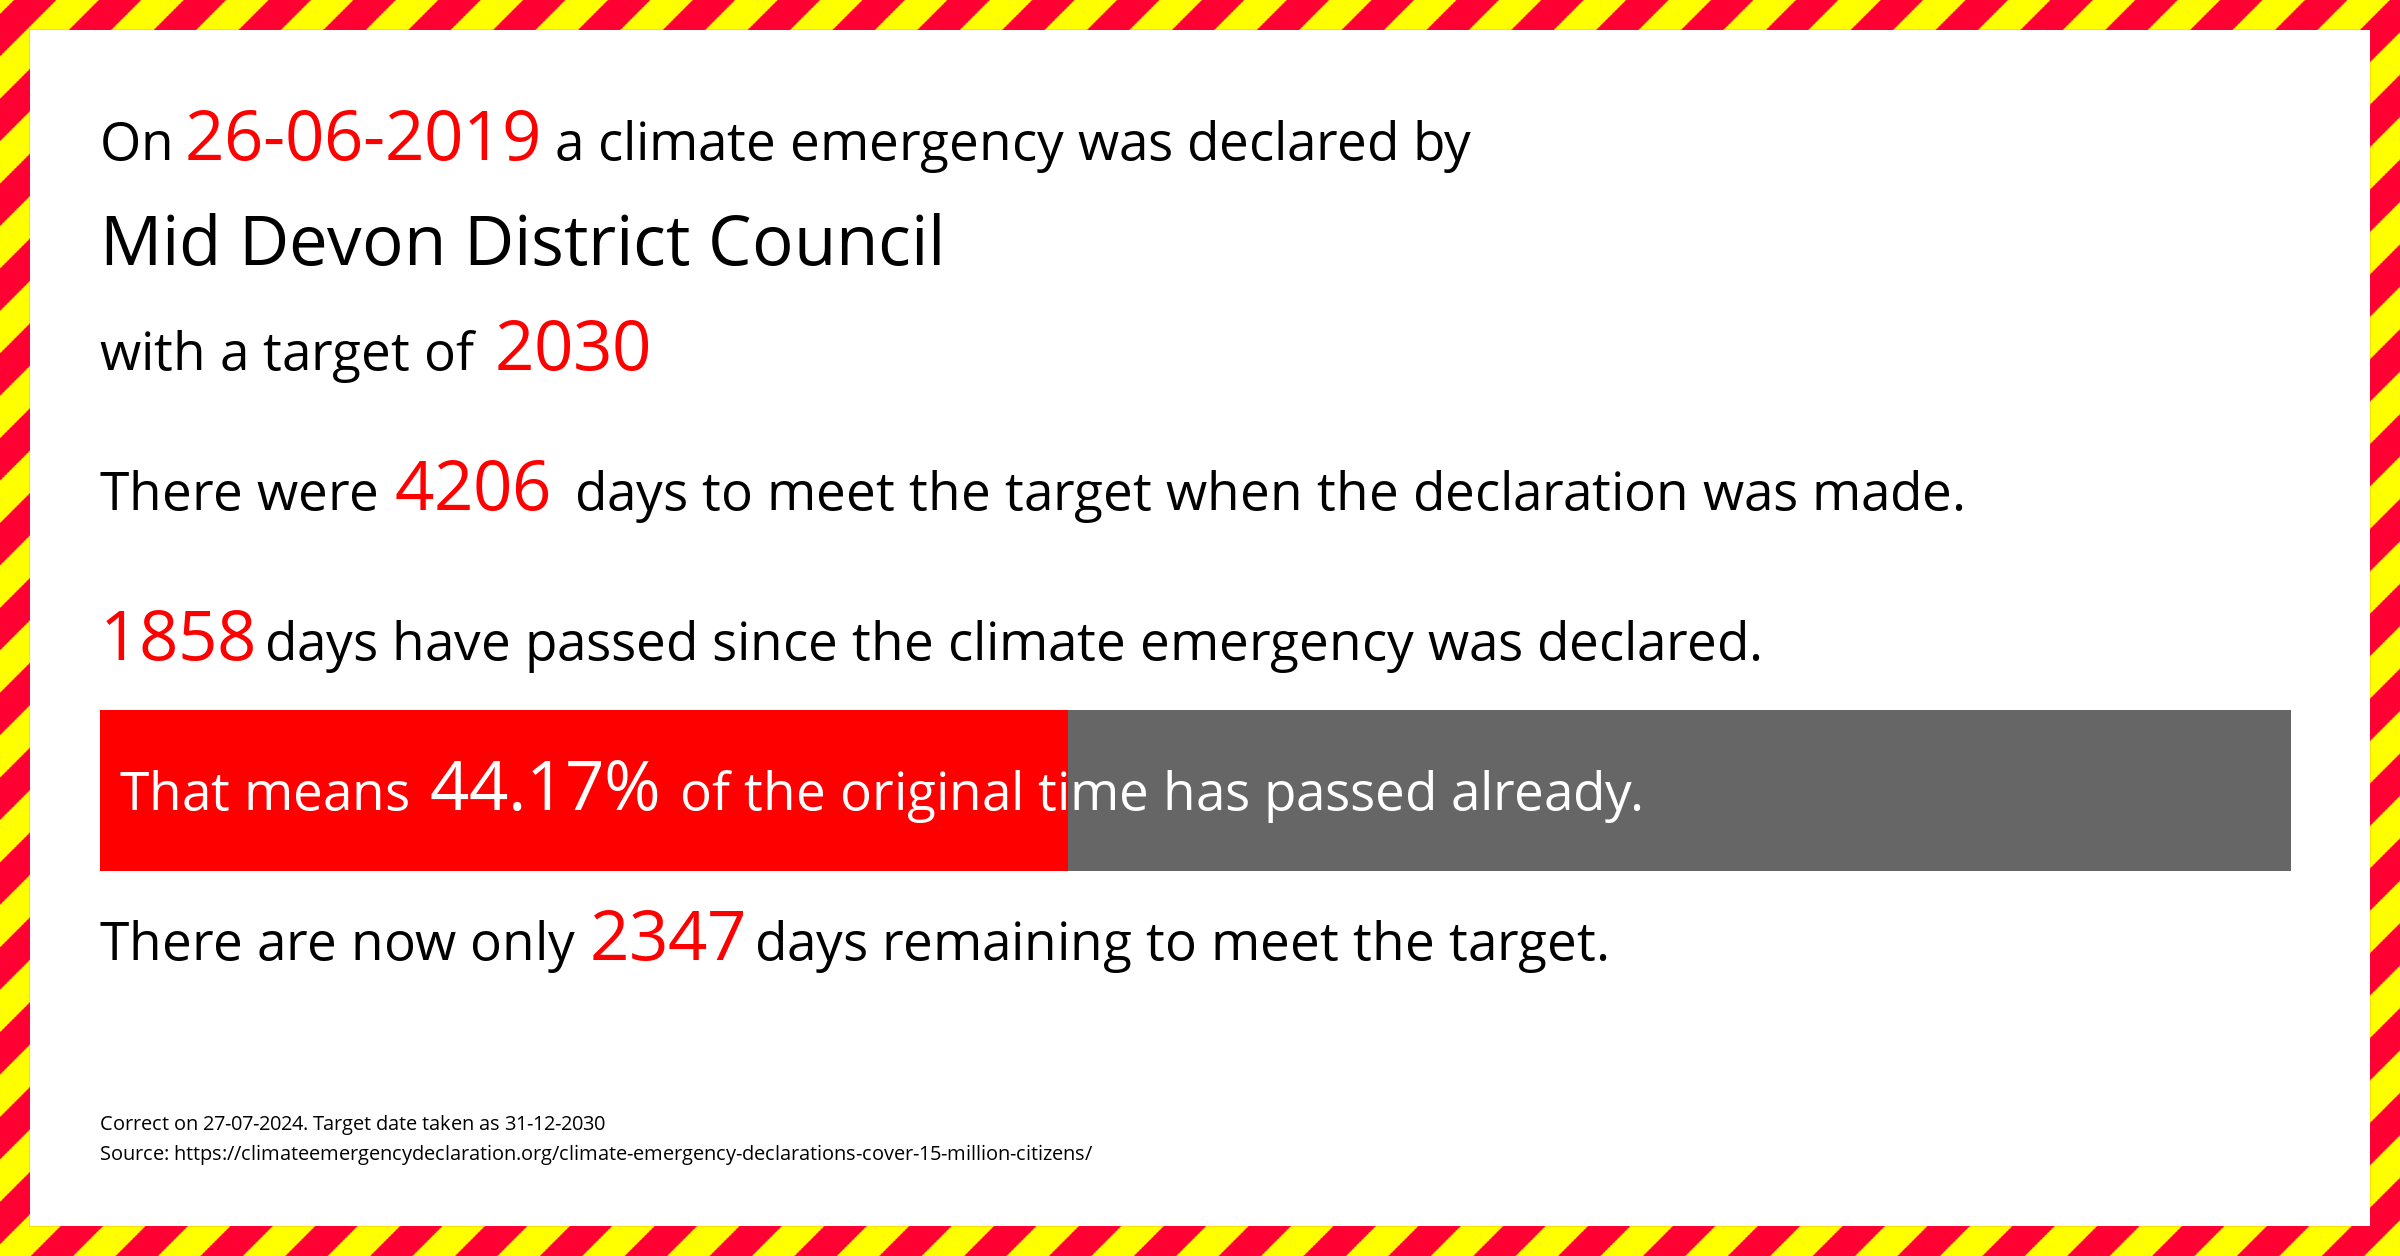 Mid Devon District Council declared a Climate emergency on Wednesday 26th June 2019, with a target of 2030.